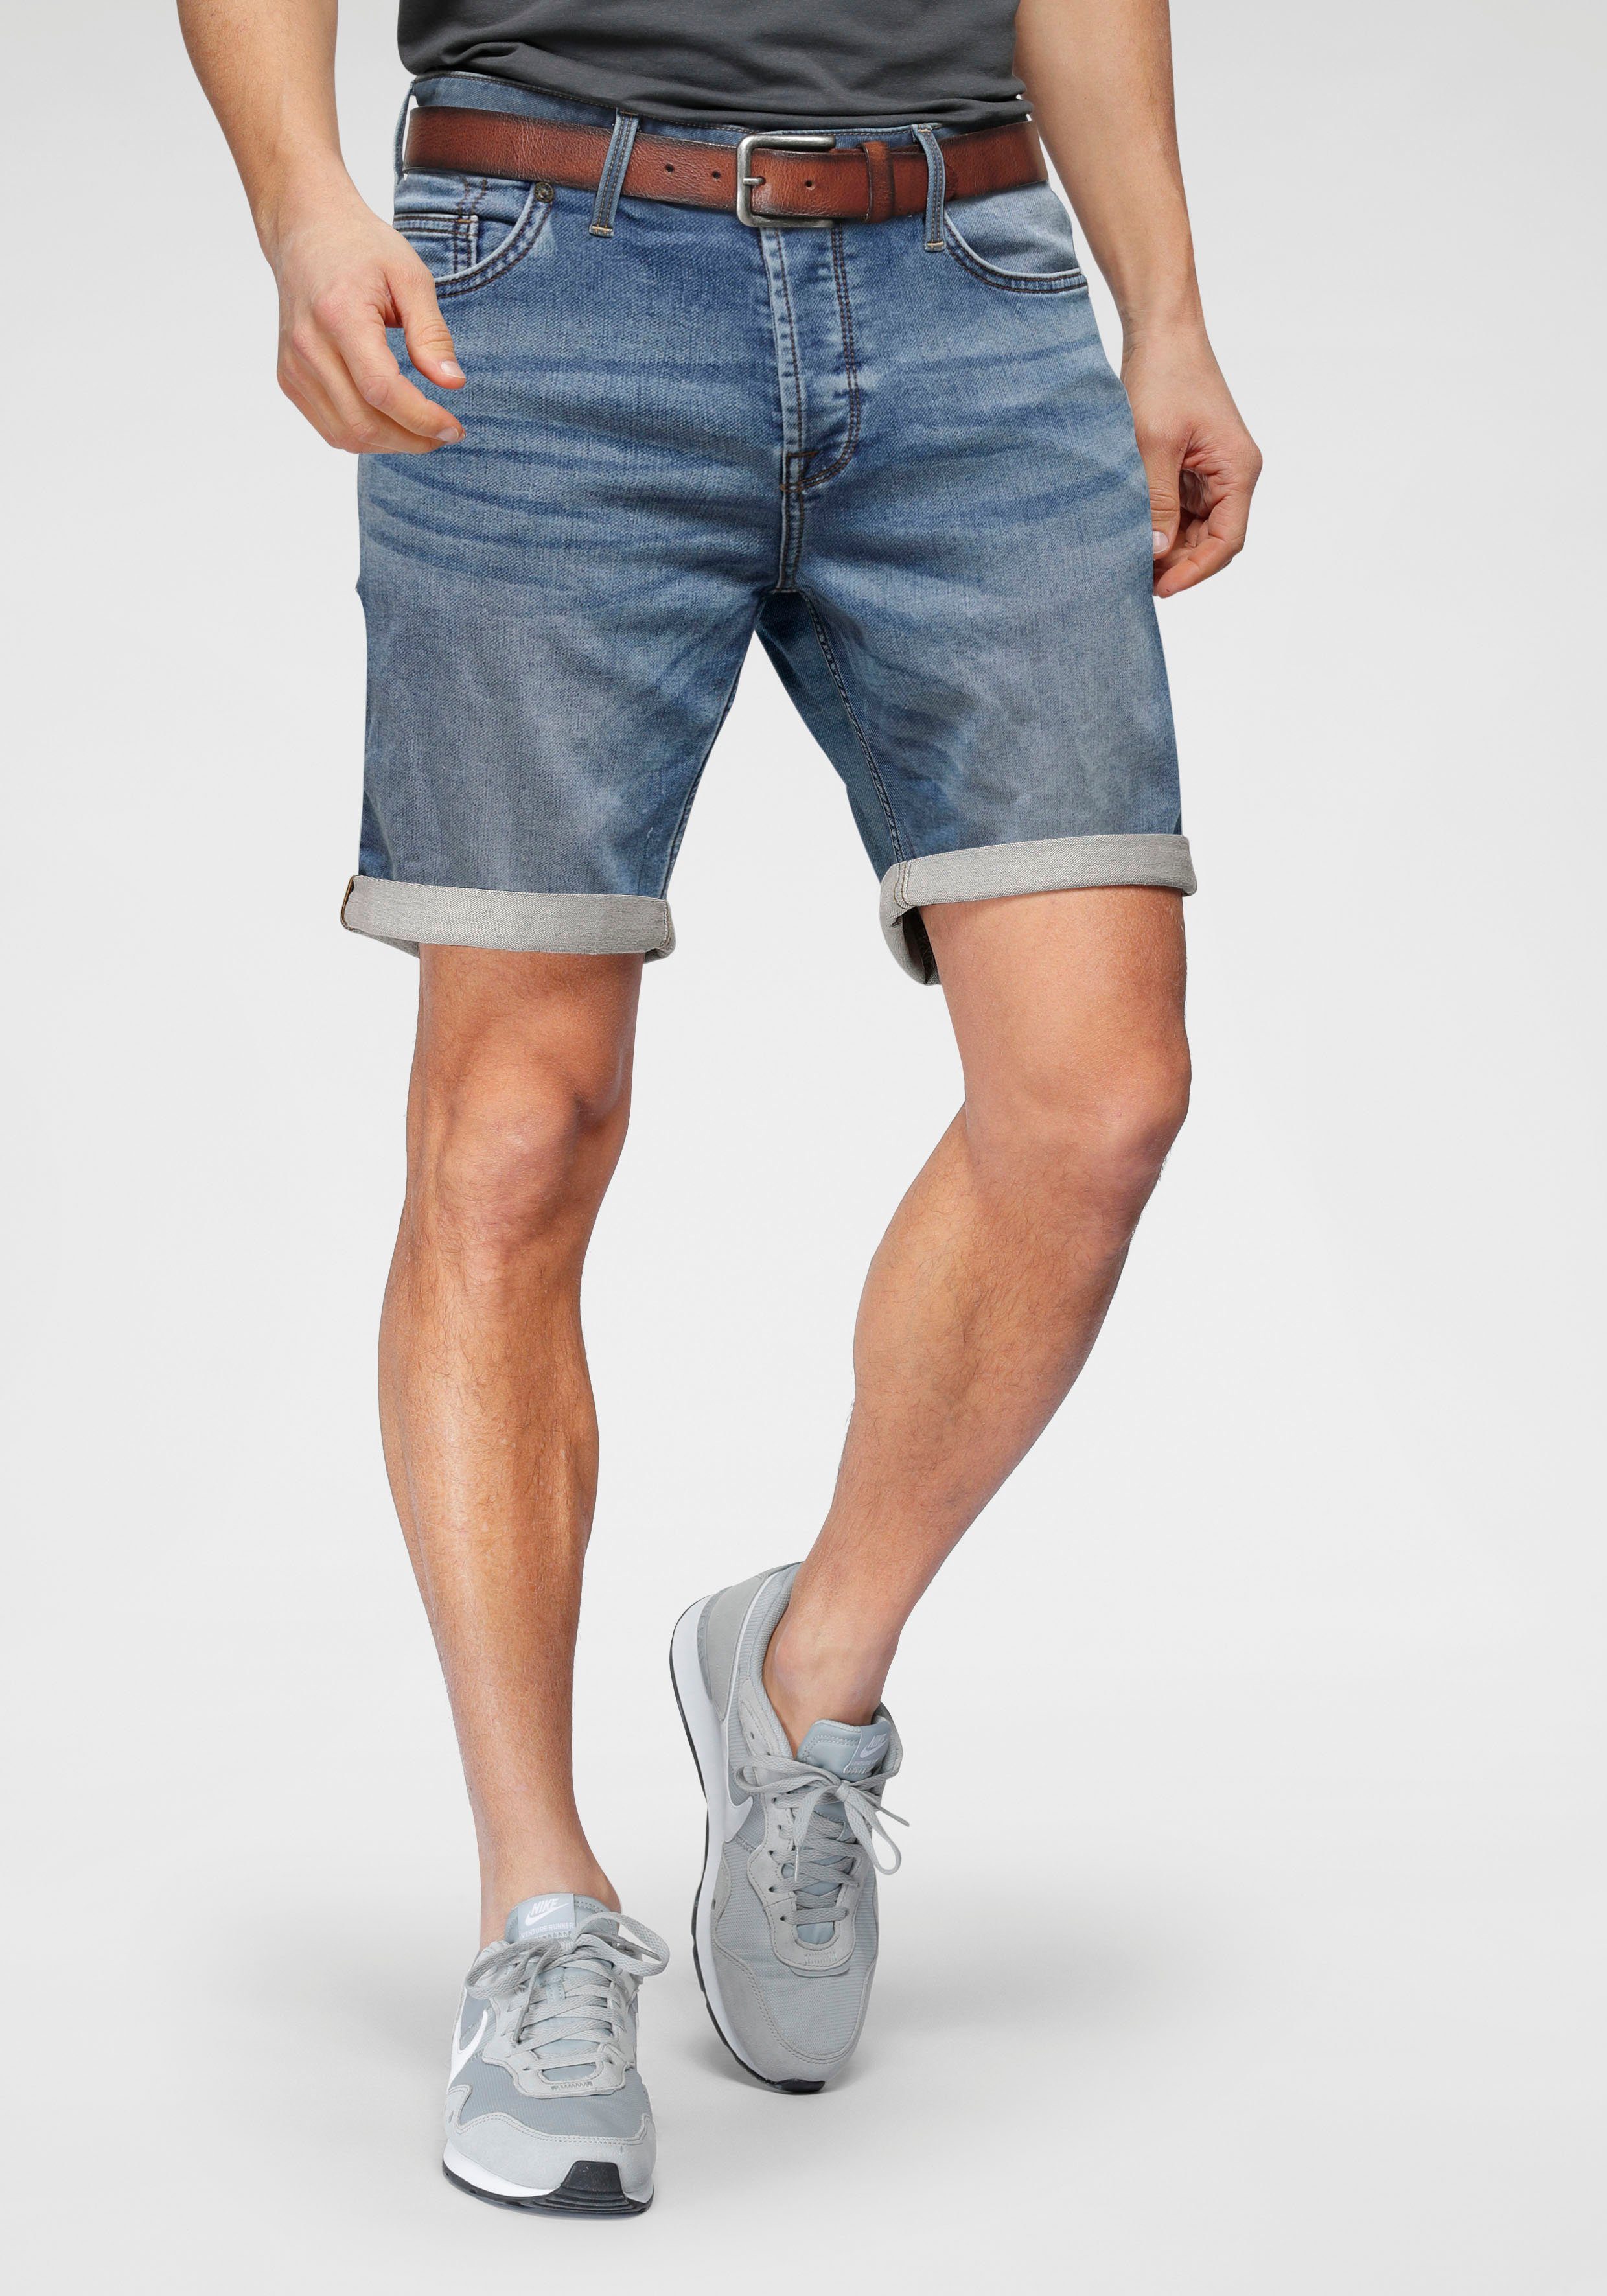 ONSPLY & Jeansshorts 5189 denim LIGHT Blue DNM SHORTS SONS NOOS BLUE ONLY